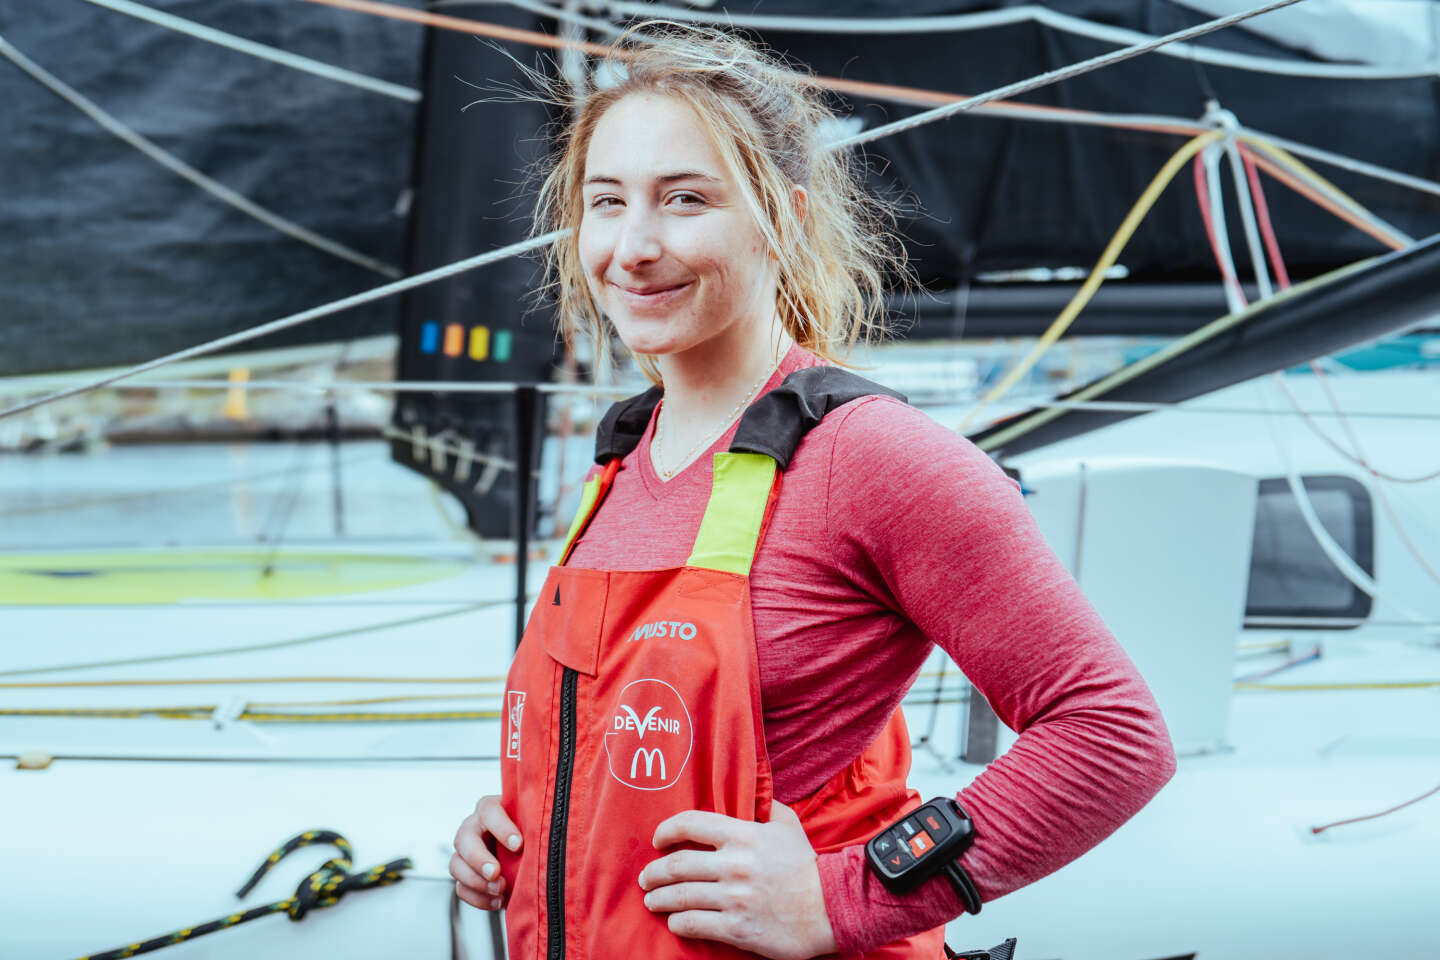 Violette Dorange sets off to conquer the world’s oceans at just 23 years old